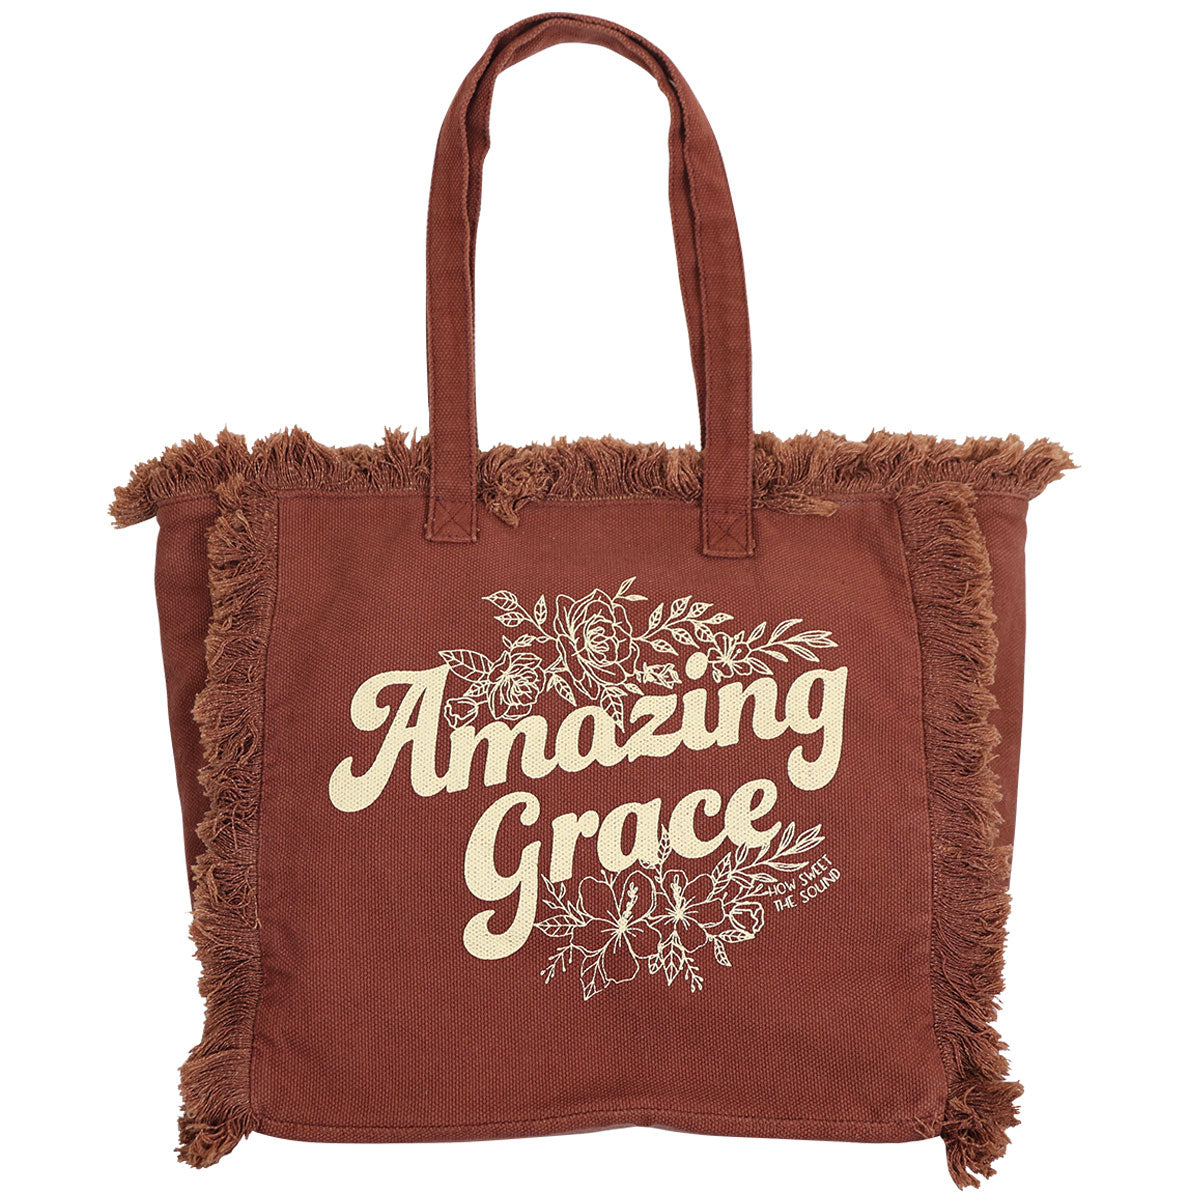 grace & truth Tote Bag Amazing Grace